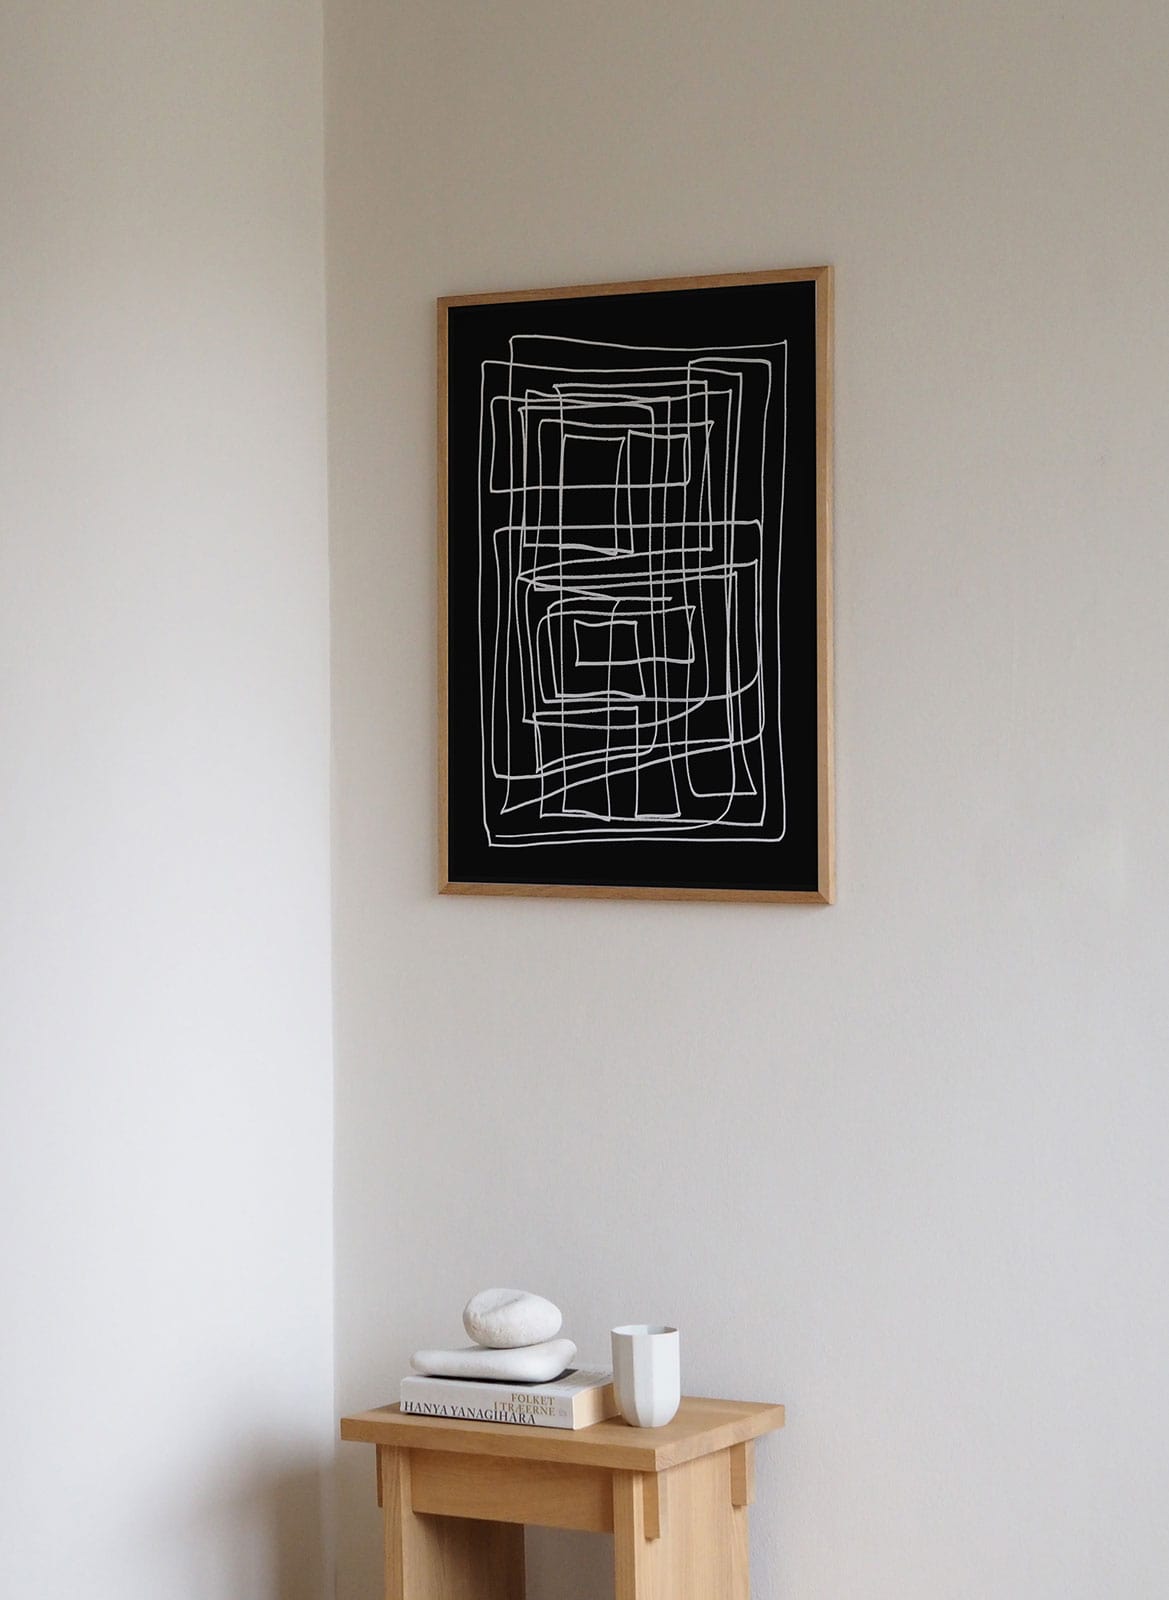 Framed minimalistic poster hanging above bedroom by Atelier Cph